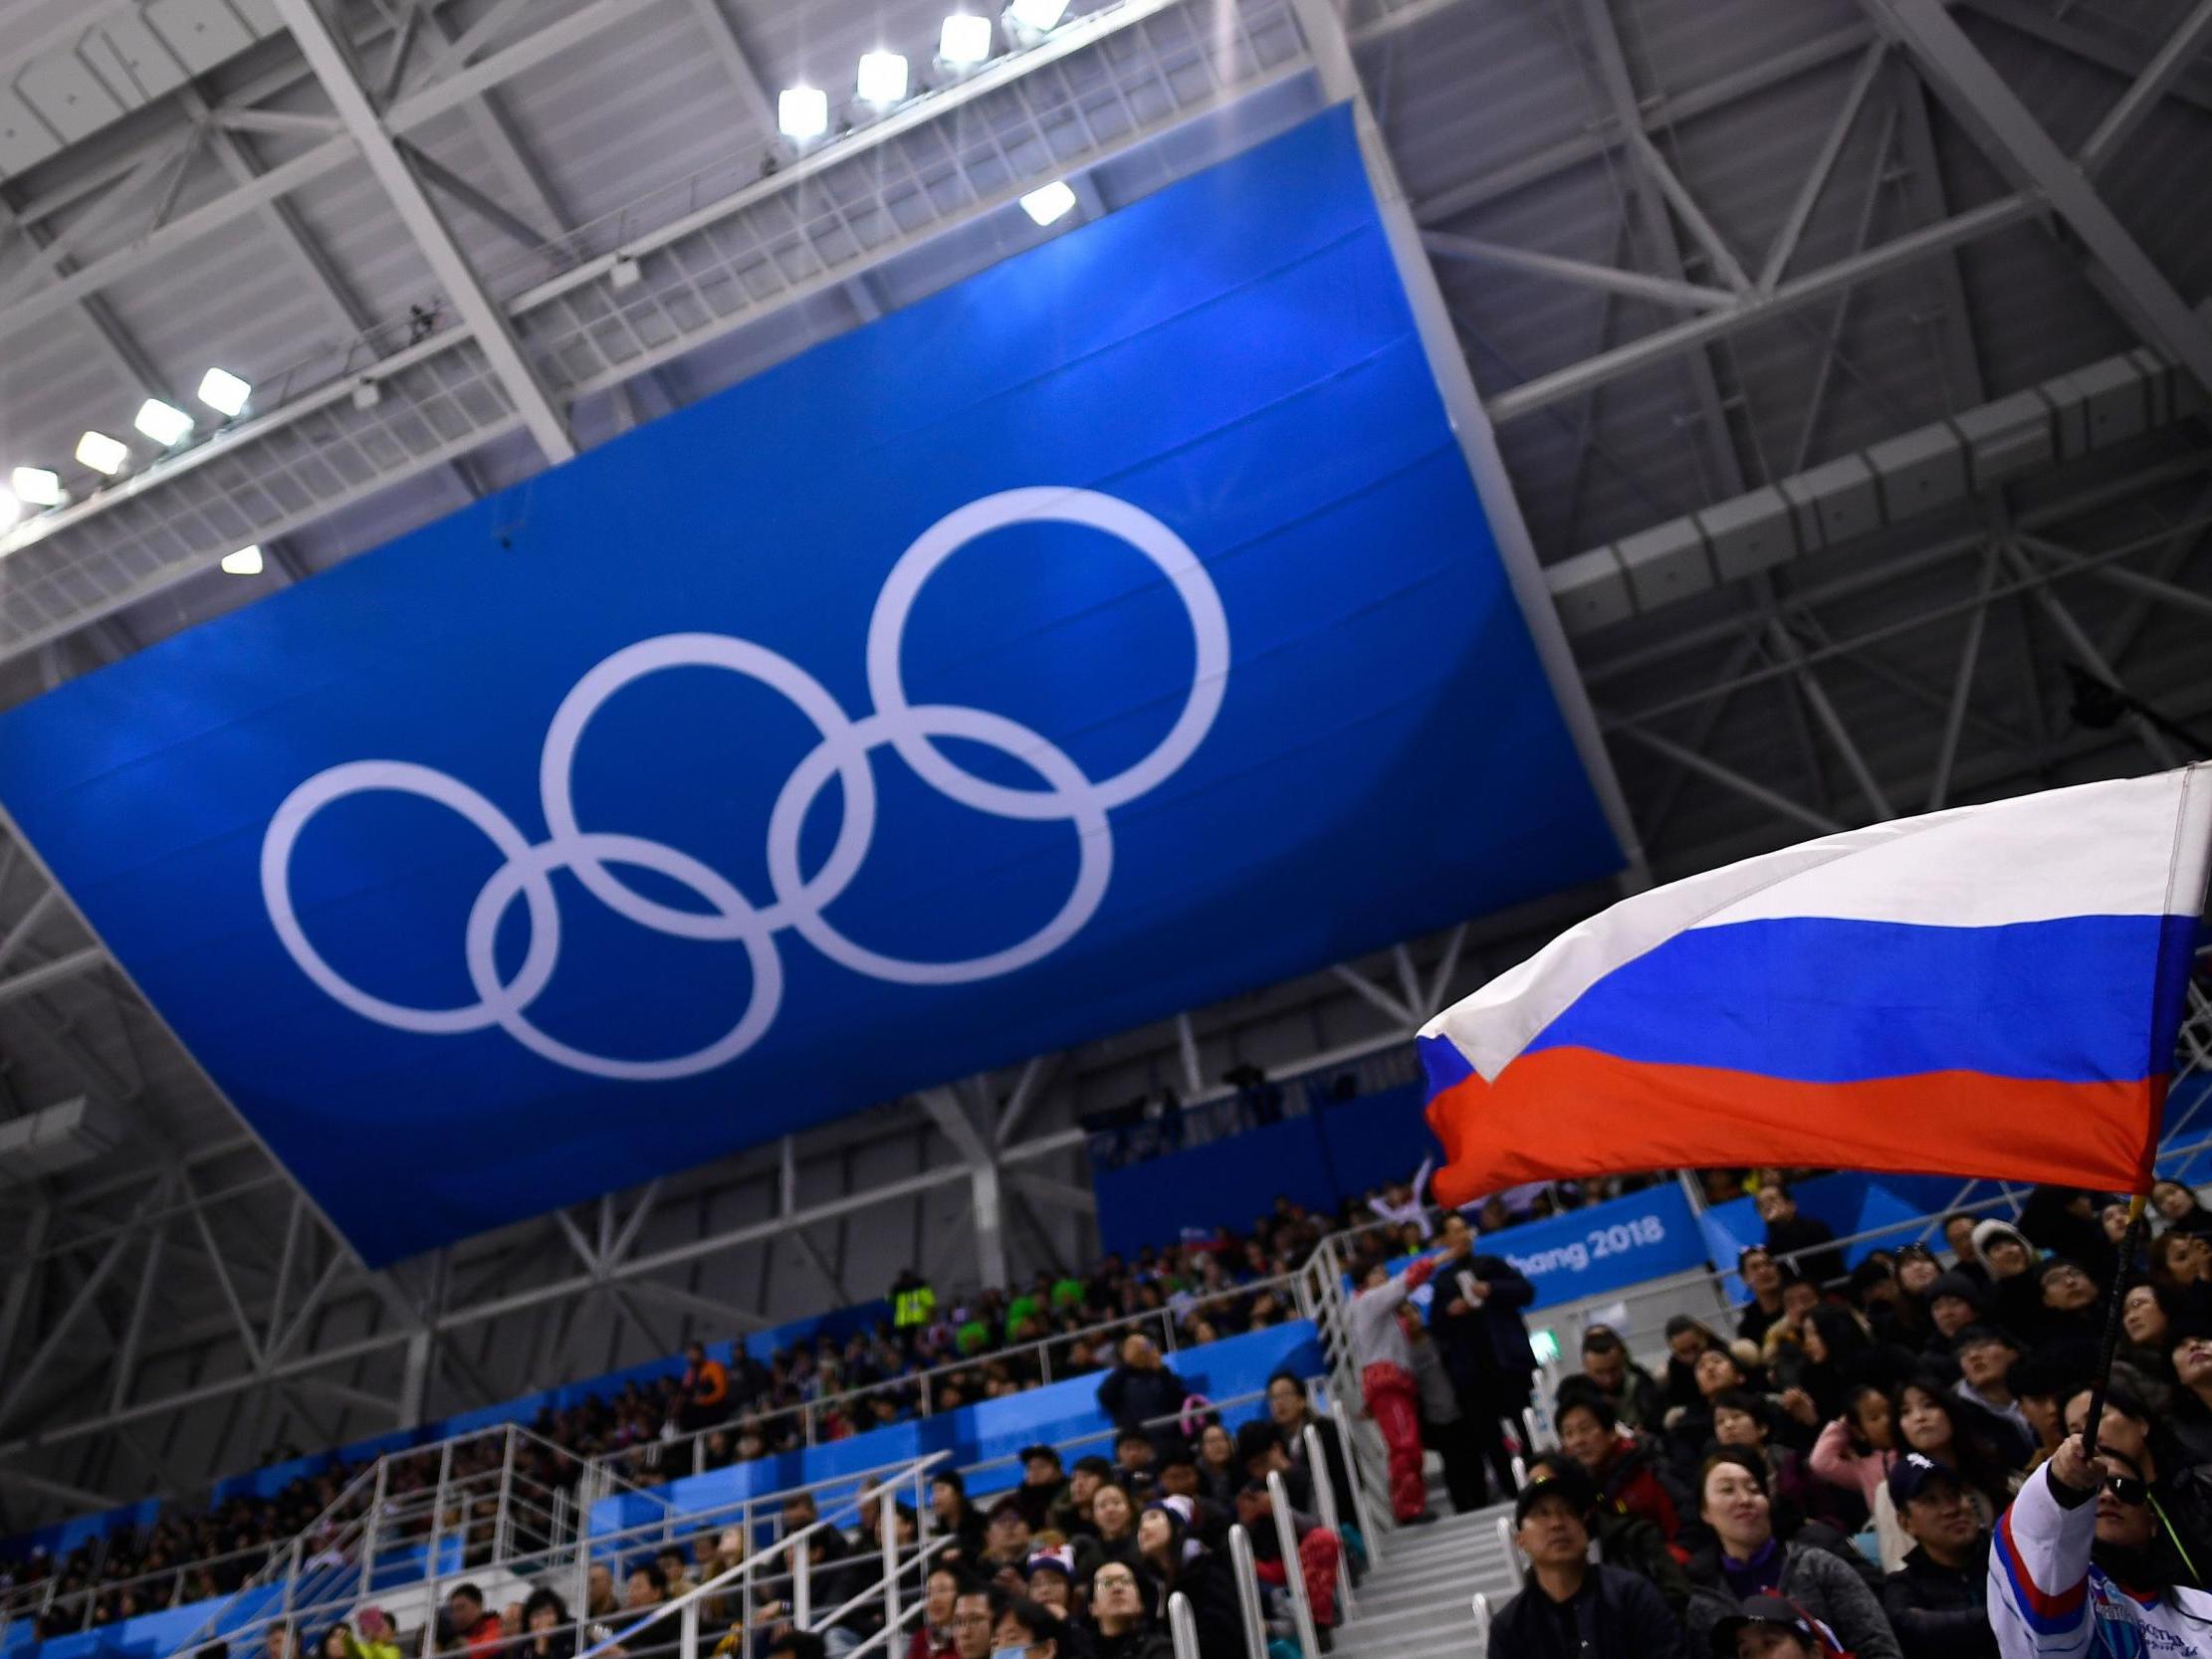 The Russia doping scandal stretches back to the 2014 Sochi Games